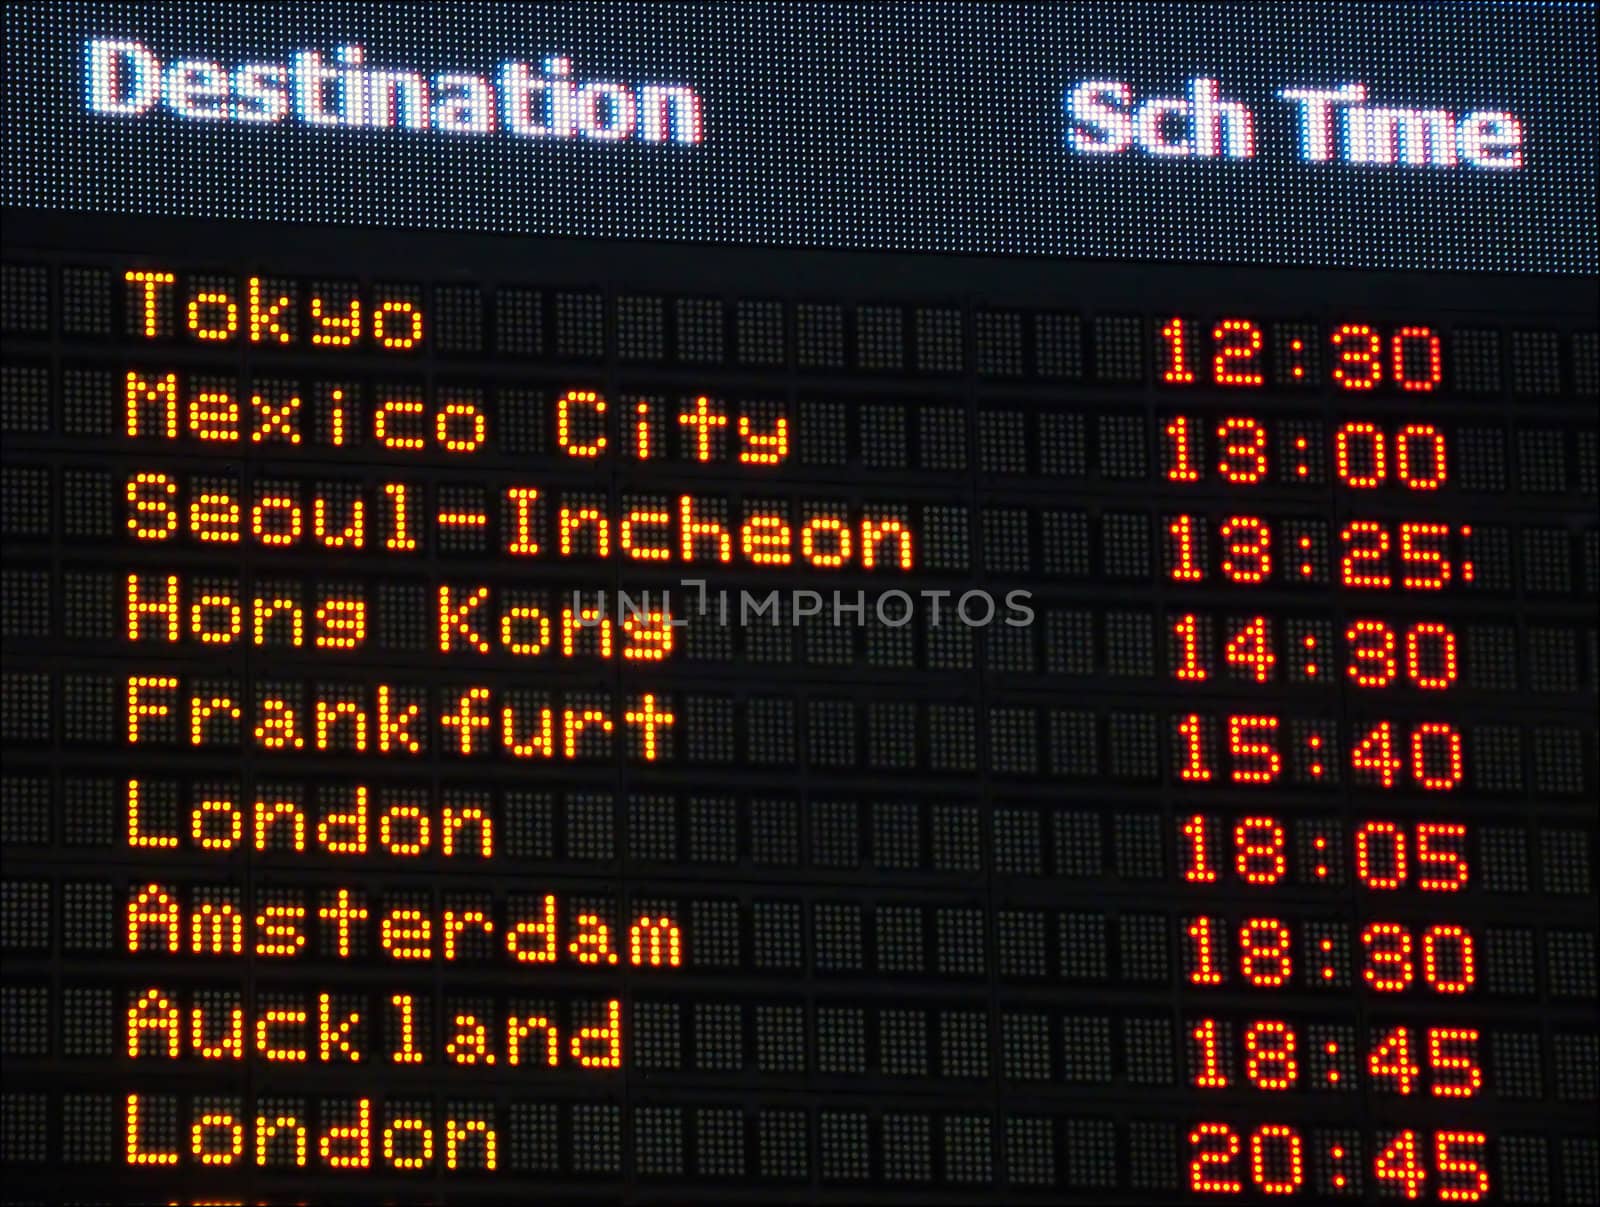 Airport information board by FER737NG